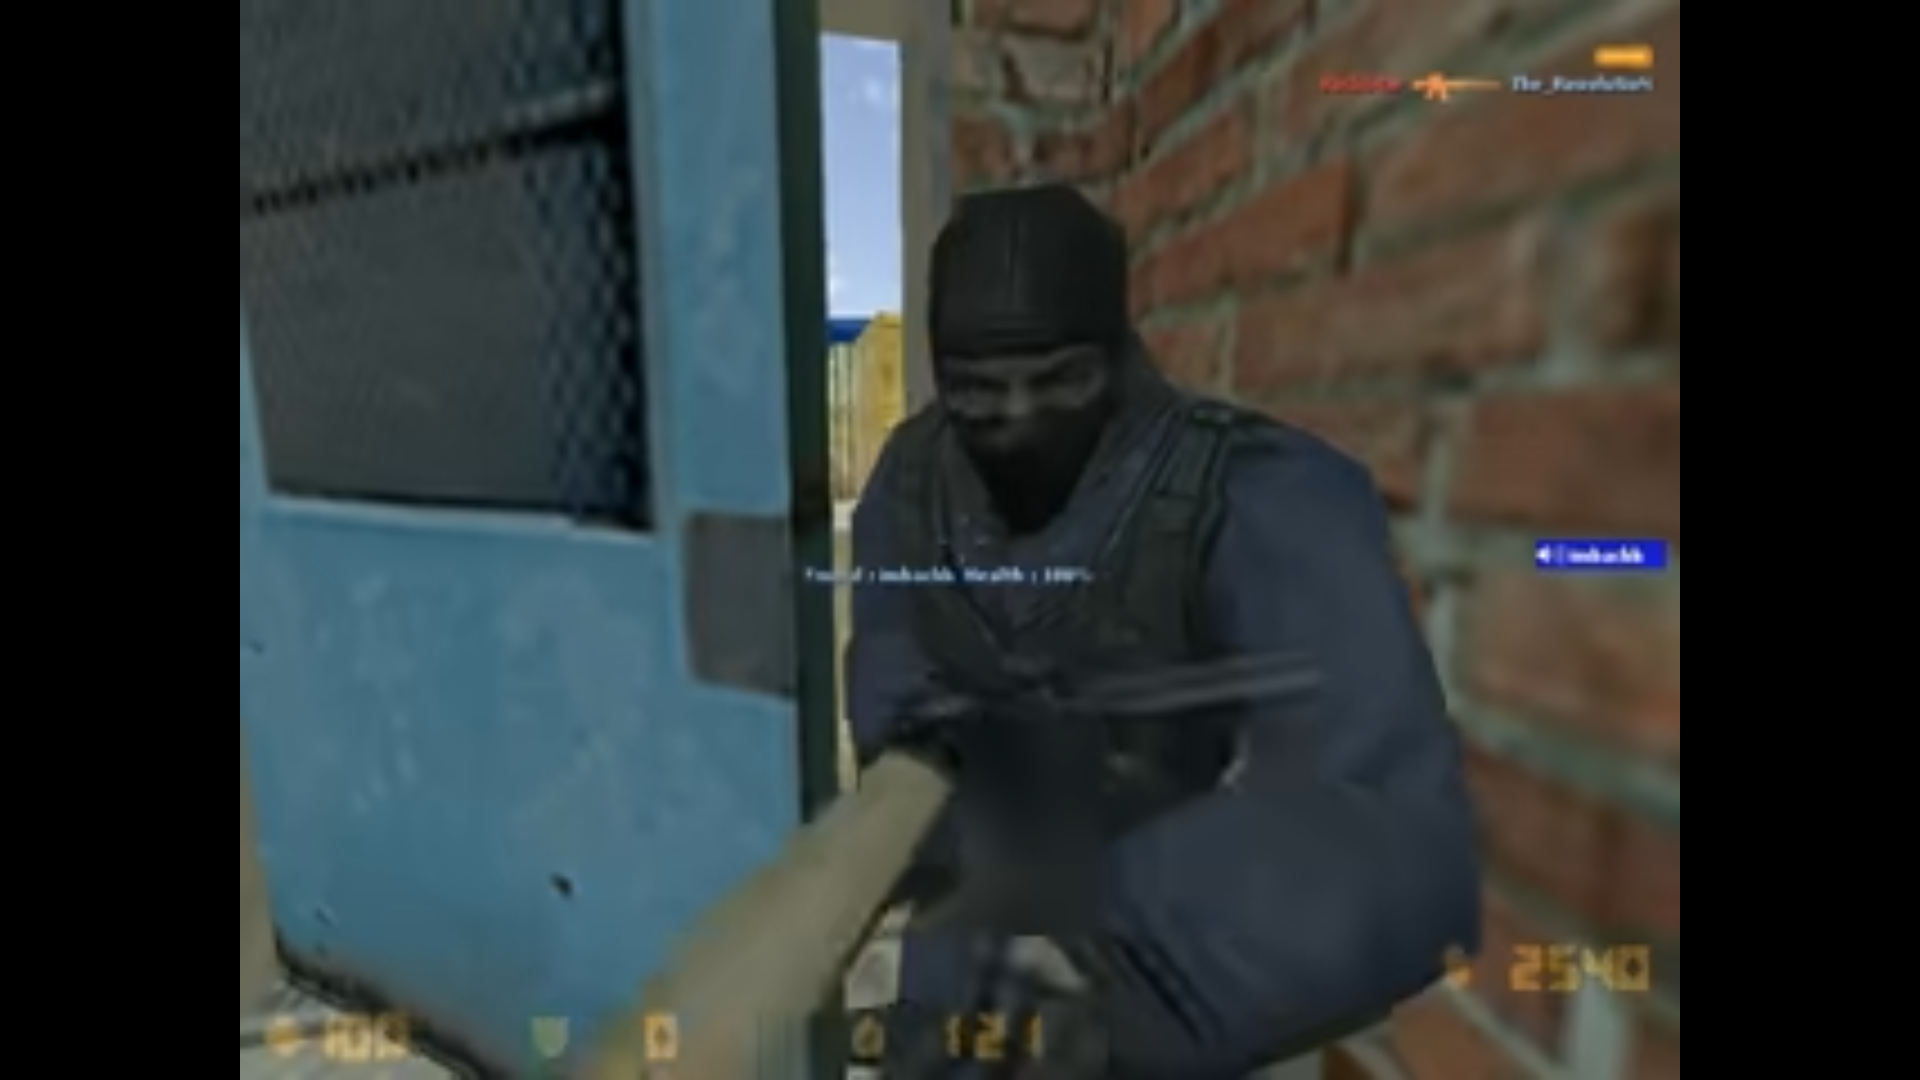 Counter-Strike’s famous Door Stuck video has been hijacked by copyright fraud